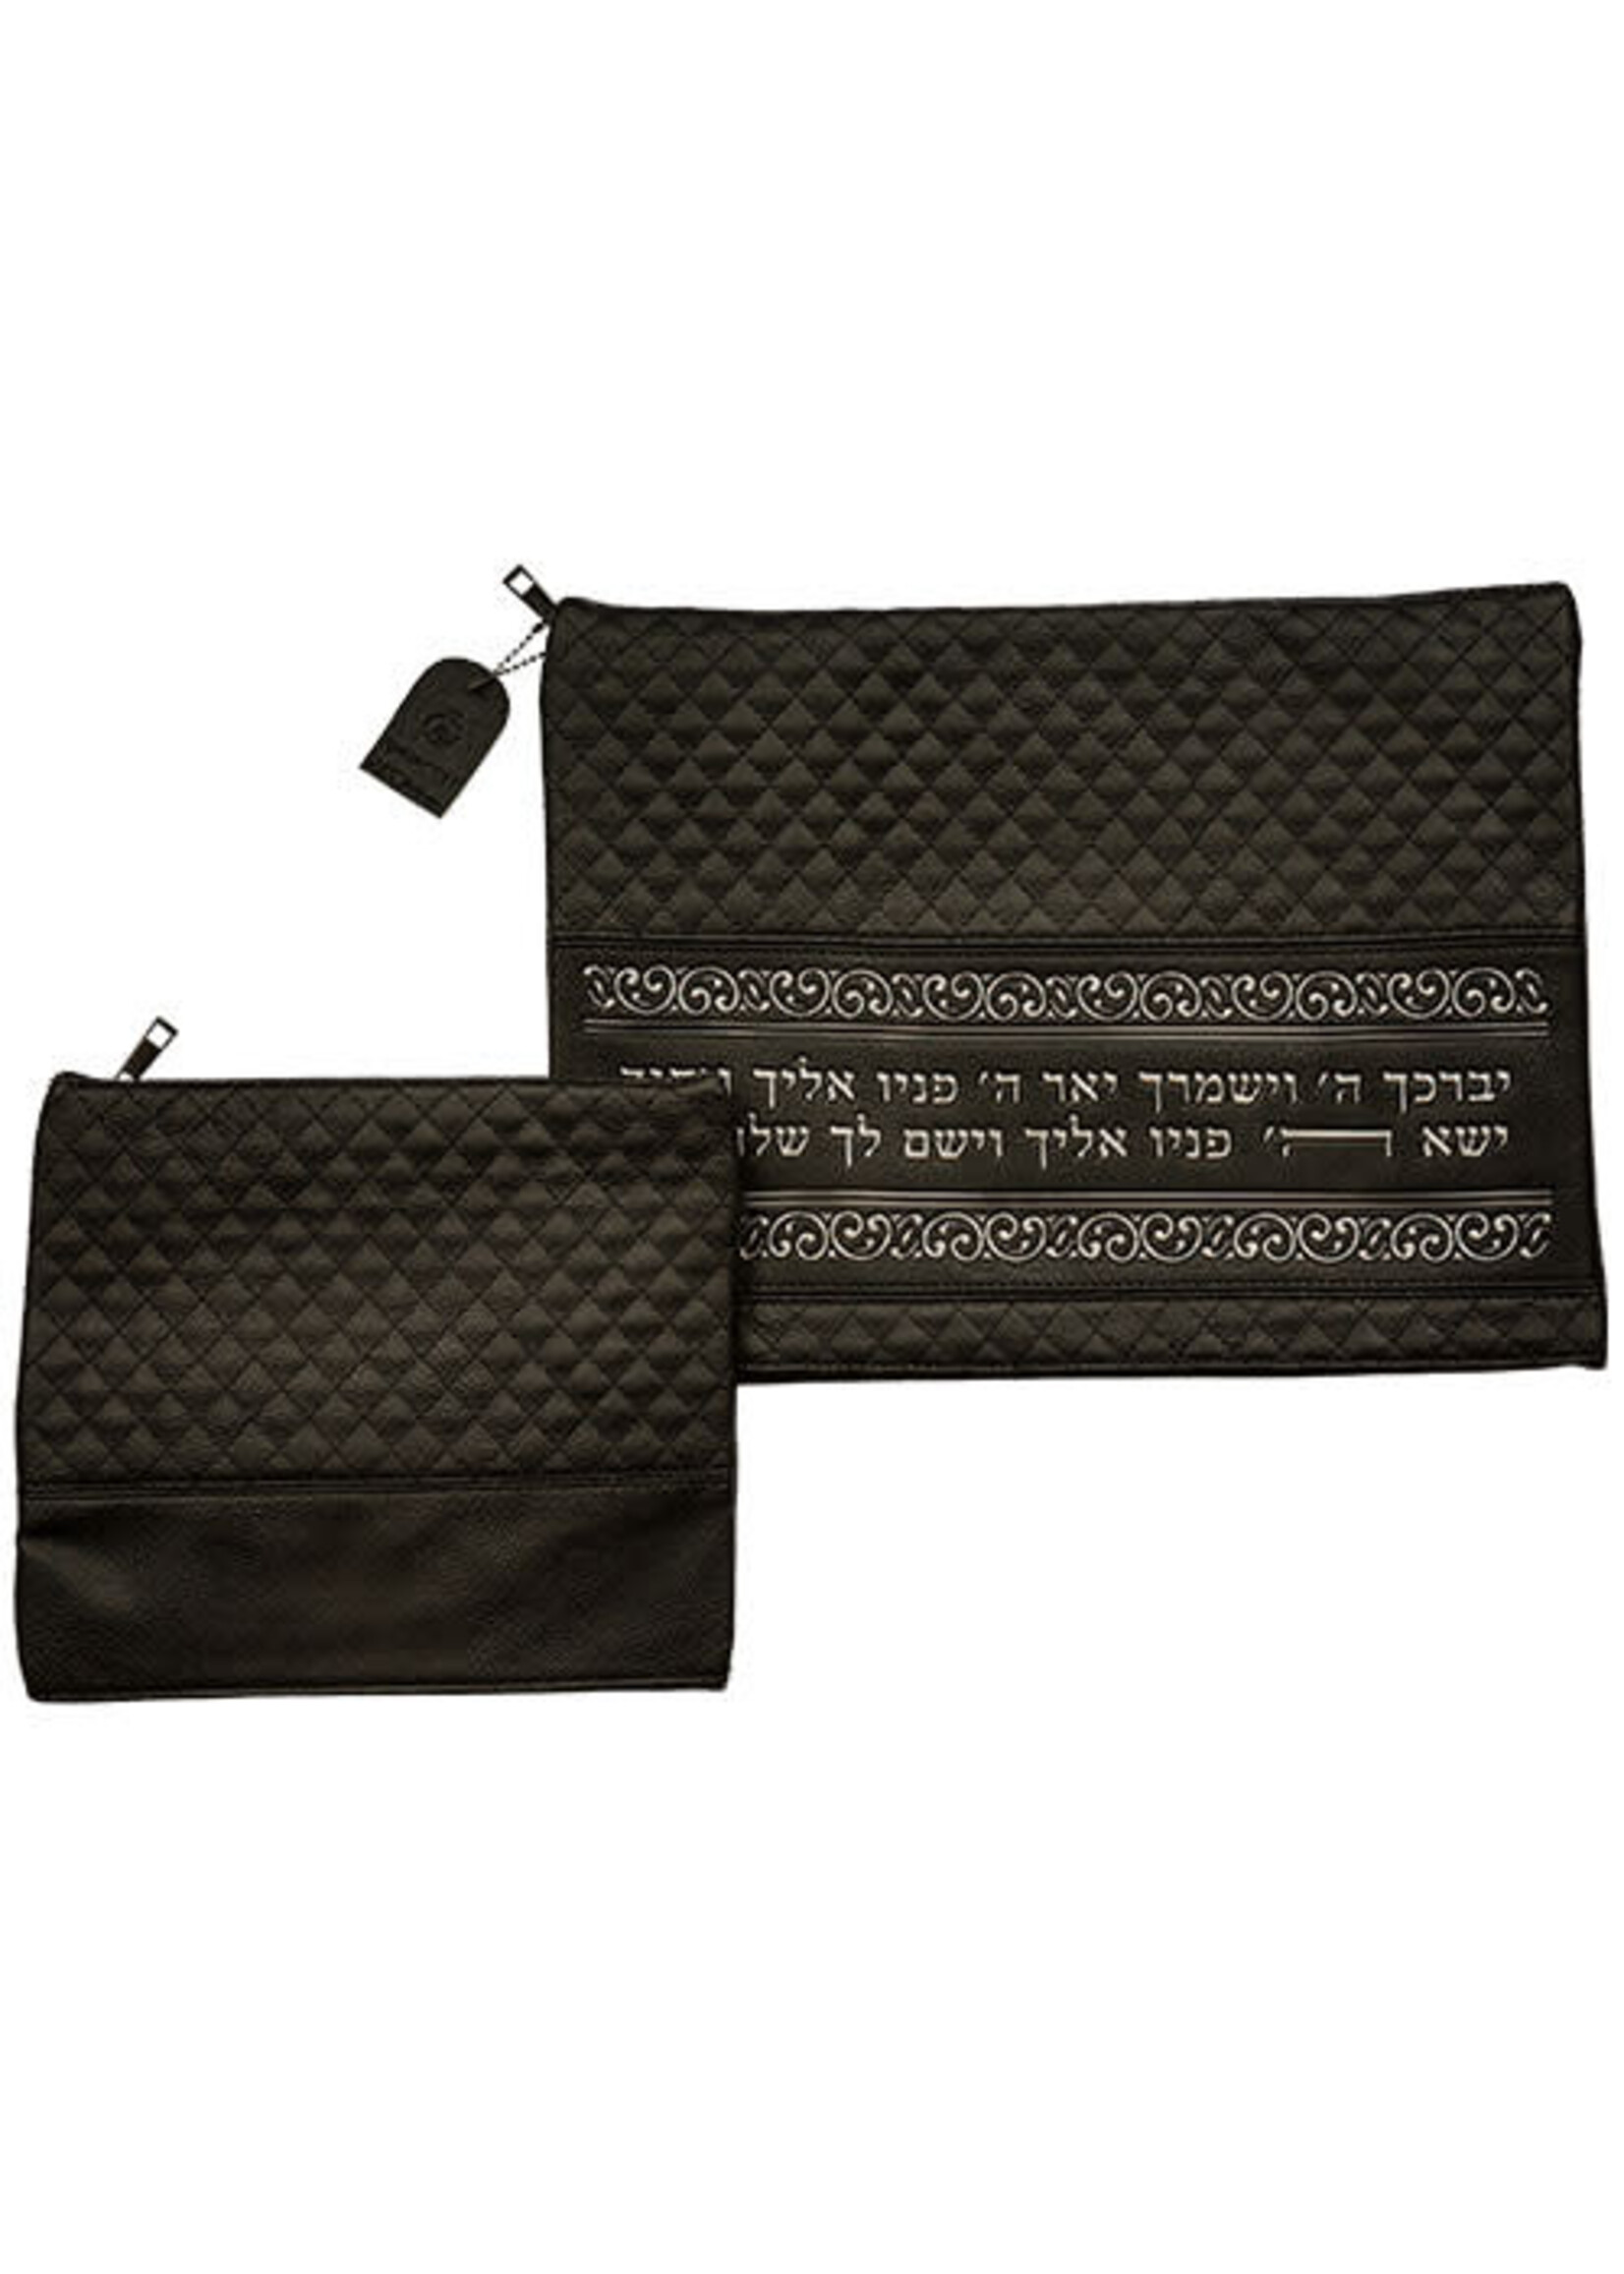 TALLIS AND TEFILLIN BAG SET CROSTITCH AND EMBRIODERY